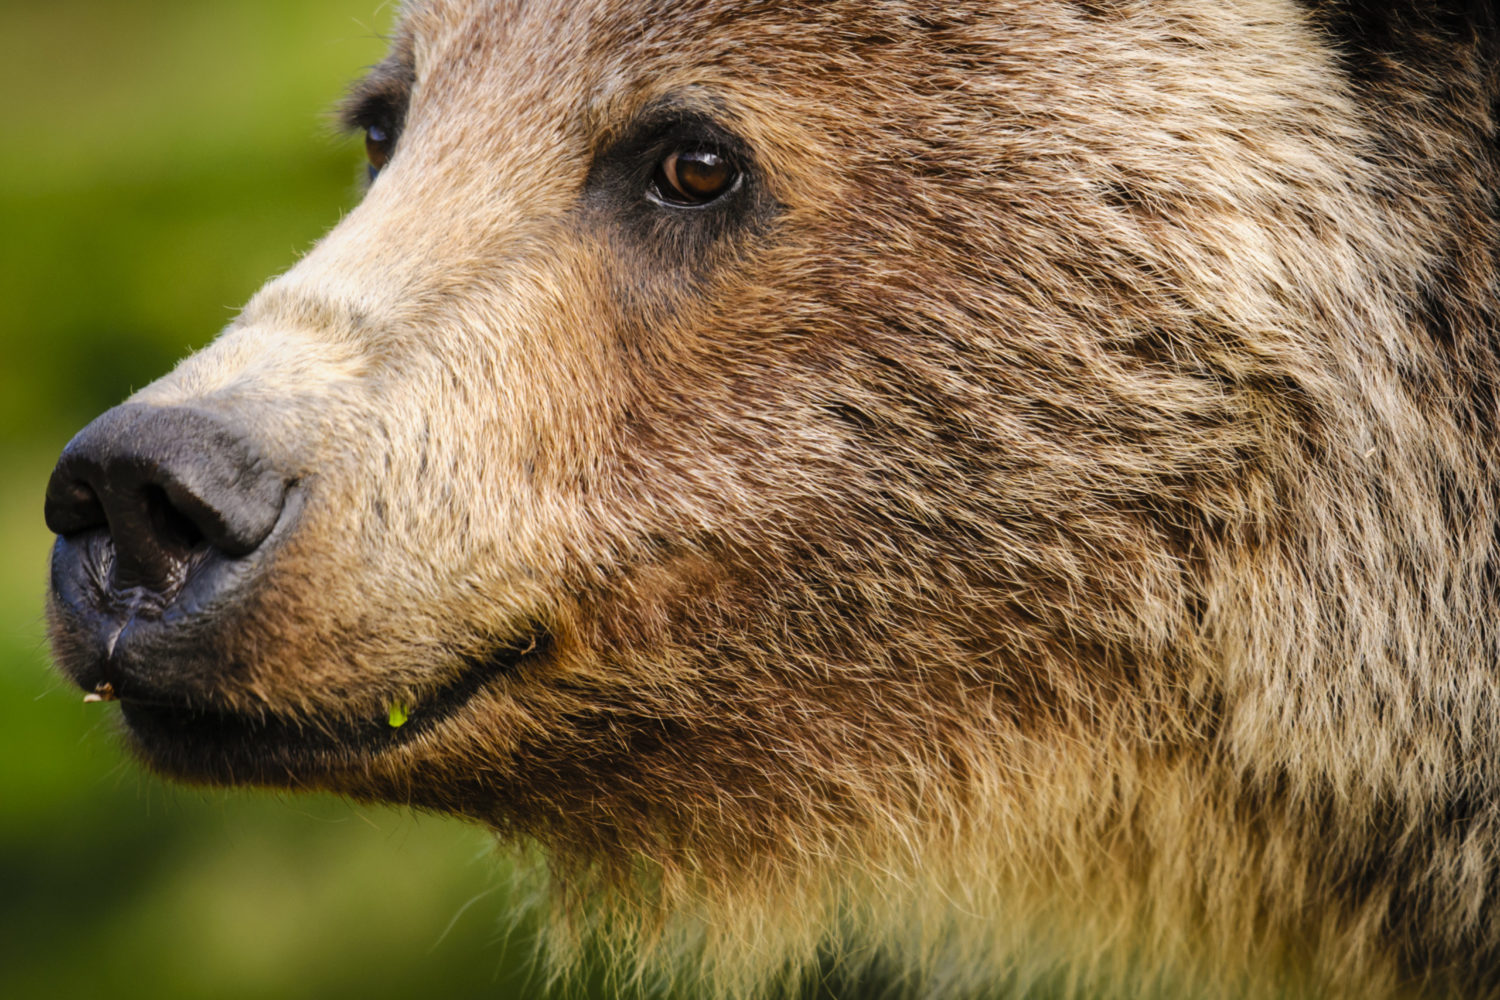 Grizzly | Yellowstone to Yukon Conservation Initiative